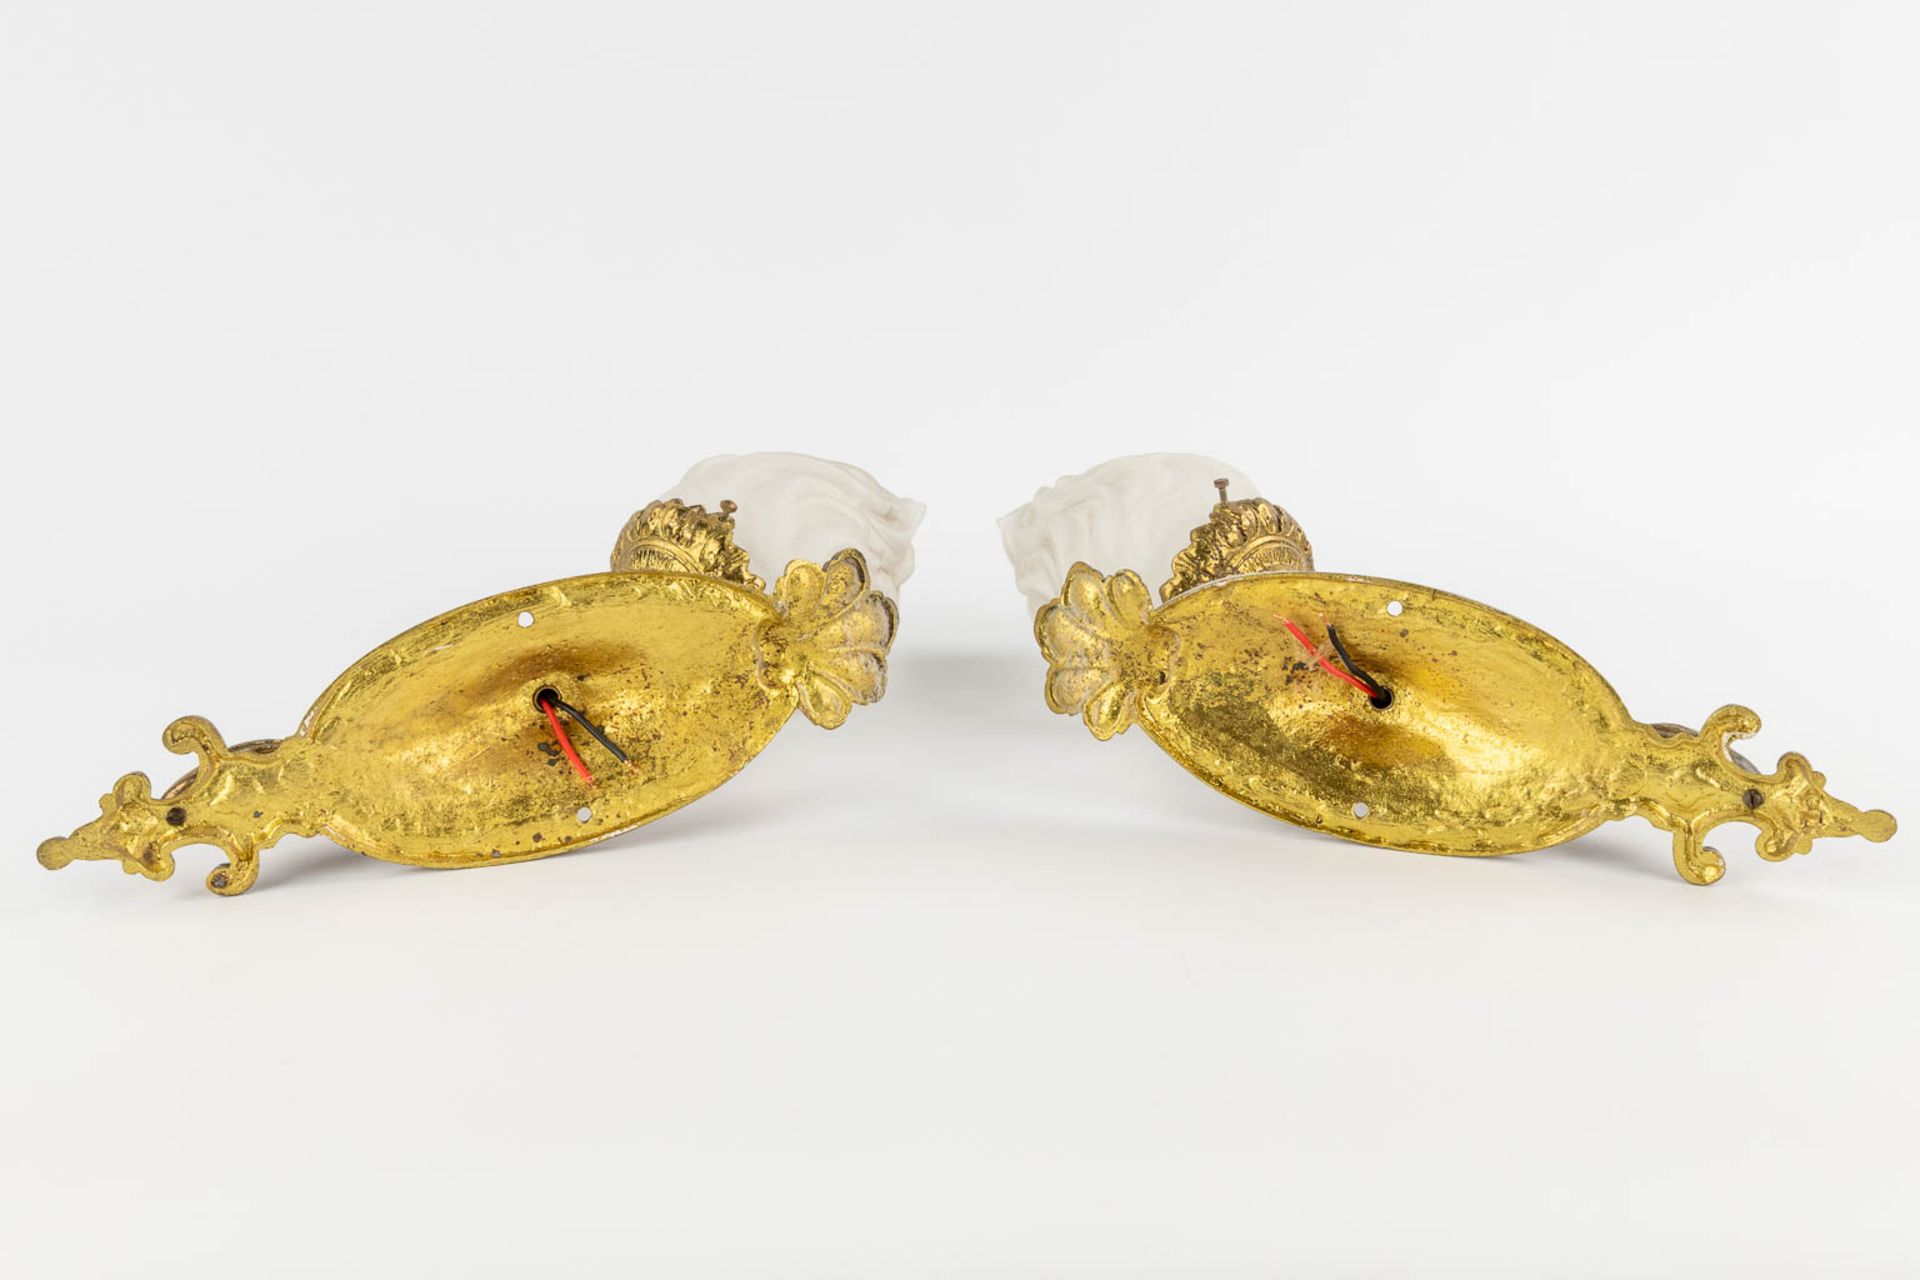 A pair of wall-mounted gilt bronze torches with a glass shade. Circa 1920. (D:21 x W:9 x H:39 cm) - Image 13 of 13